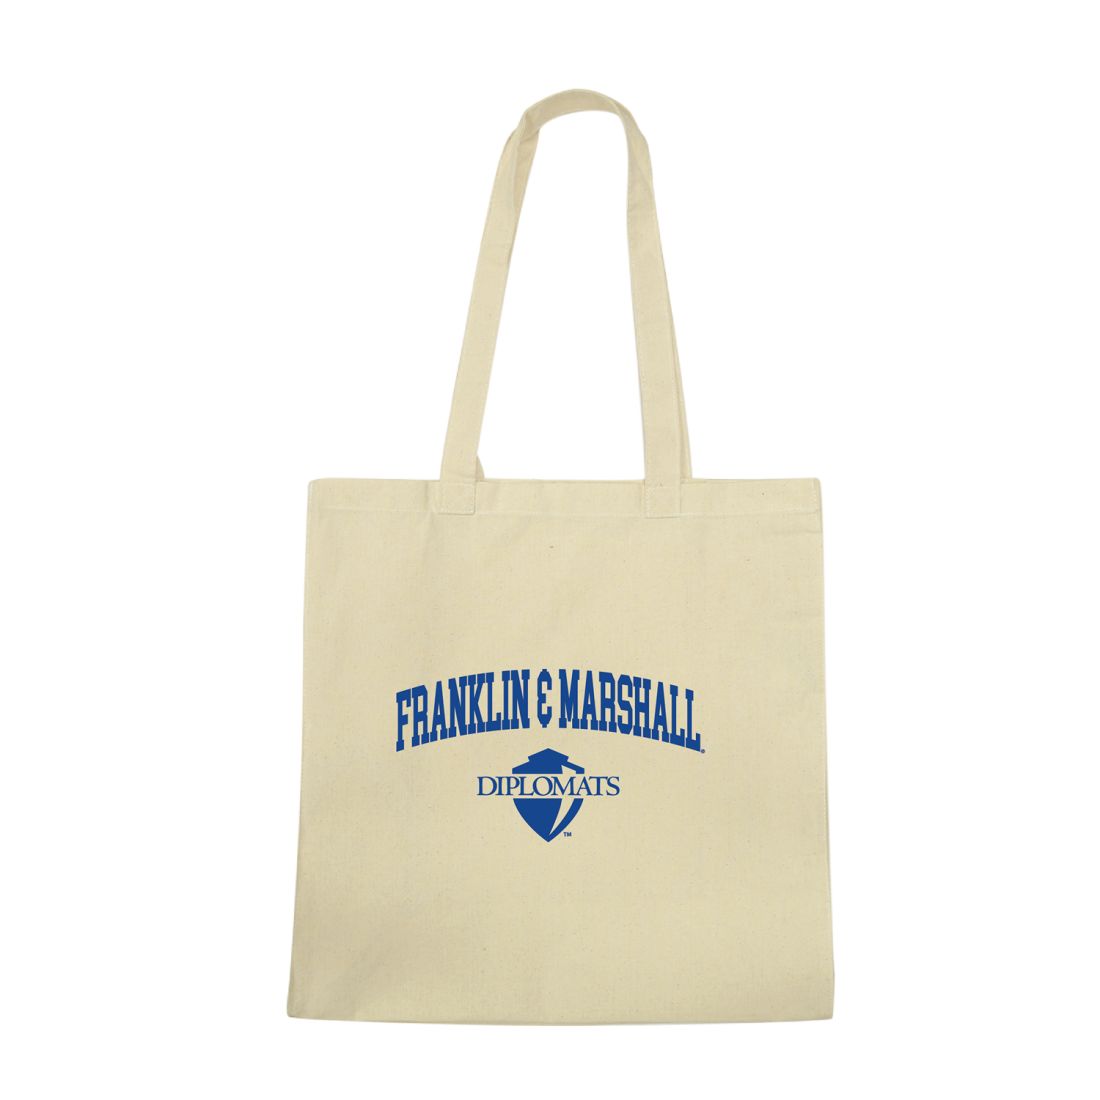 Franklin & Marshall College Diplomats Institutional Seal Tote Bag